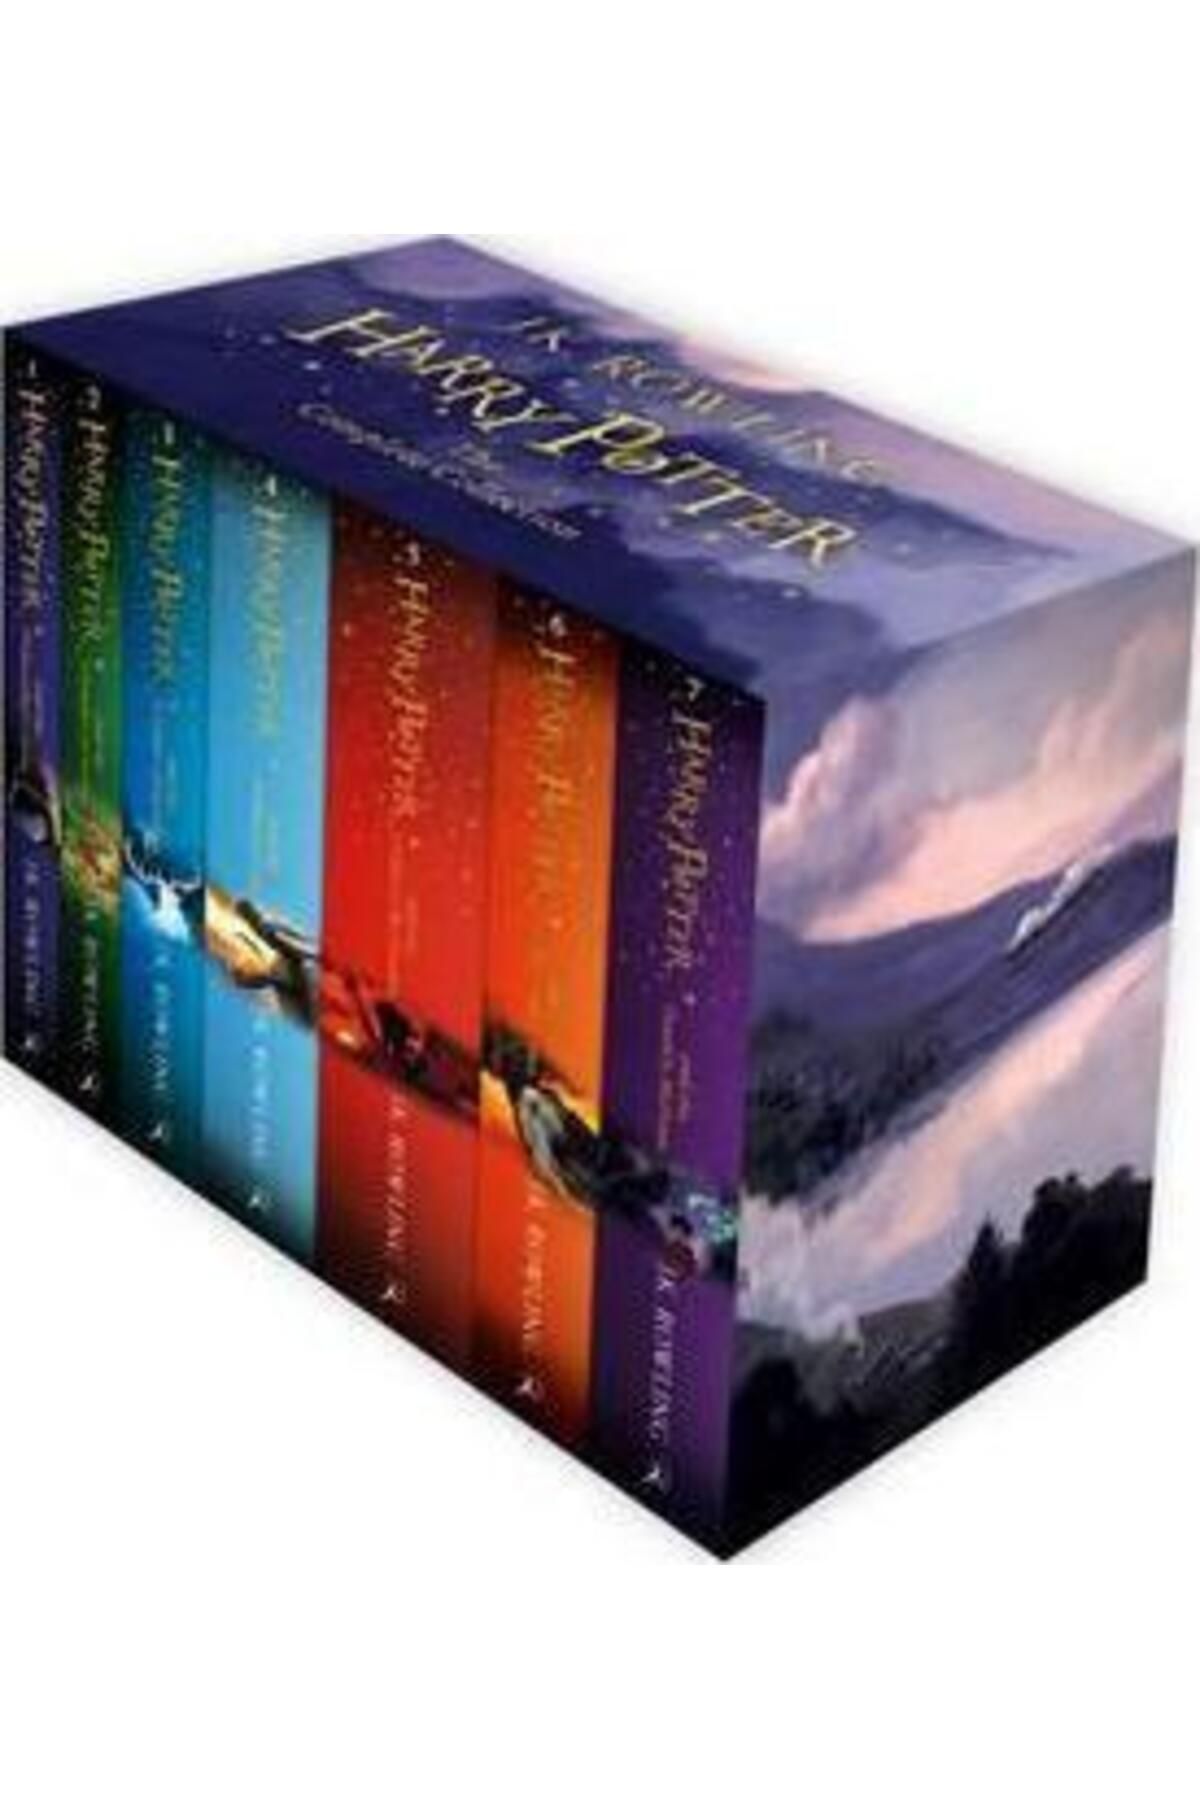 Bloomsbury Harry Potter Box Set: The Complete Collection - J. K. Rowling